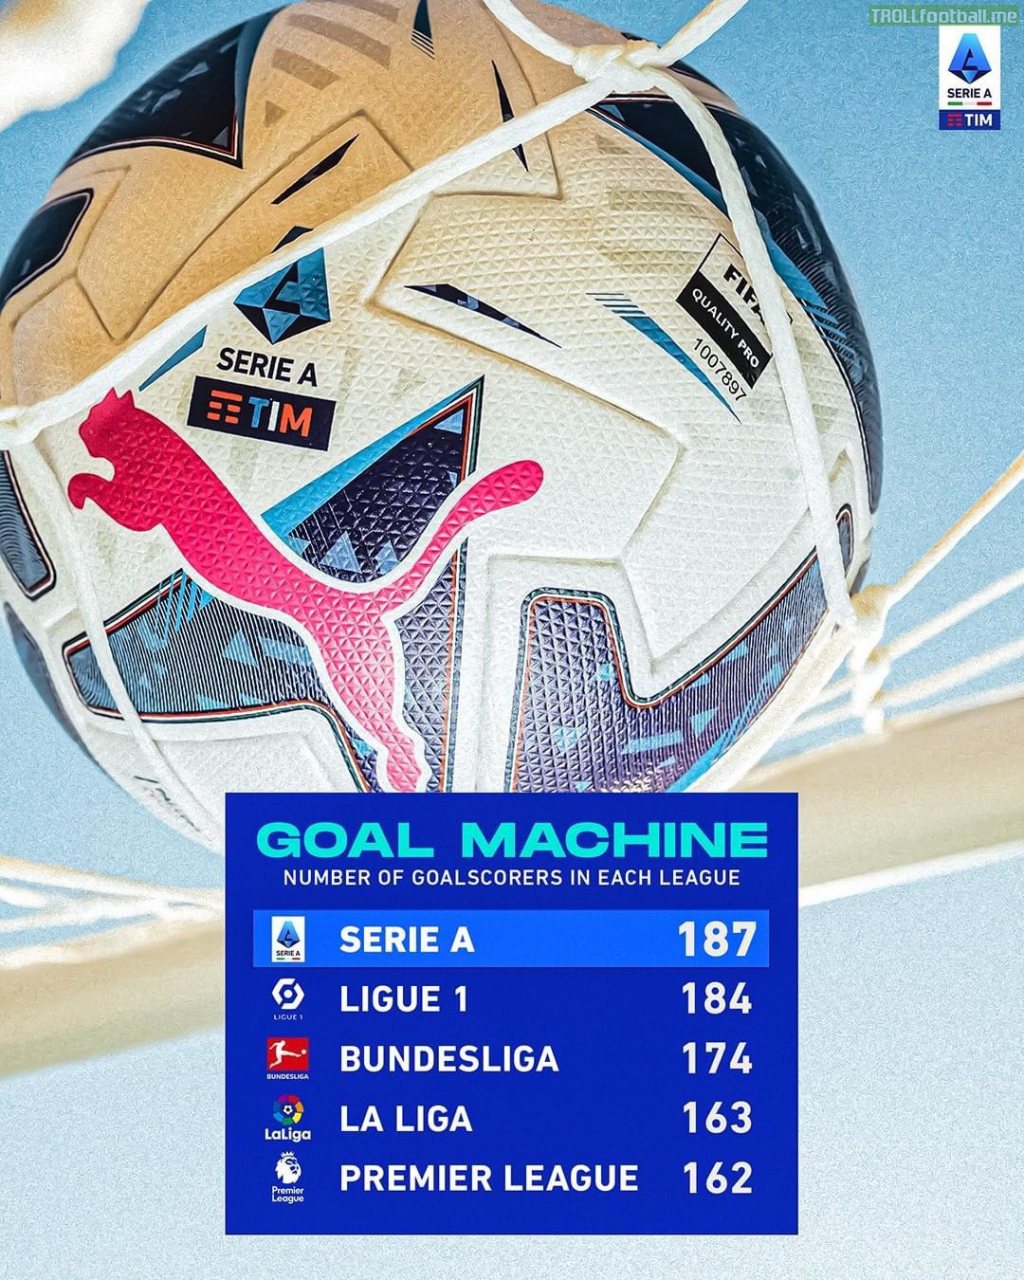 Serie A currently has the highest number of goal scorers this season in the Top 5 European Leagues